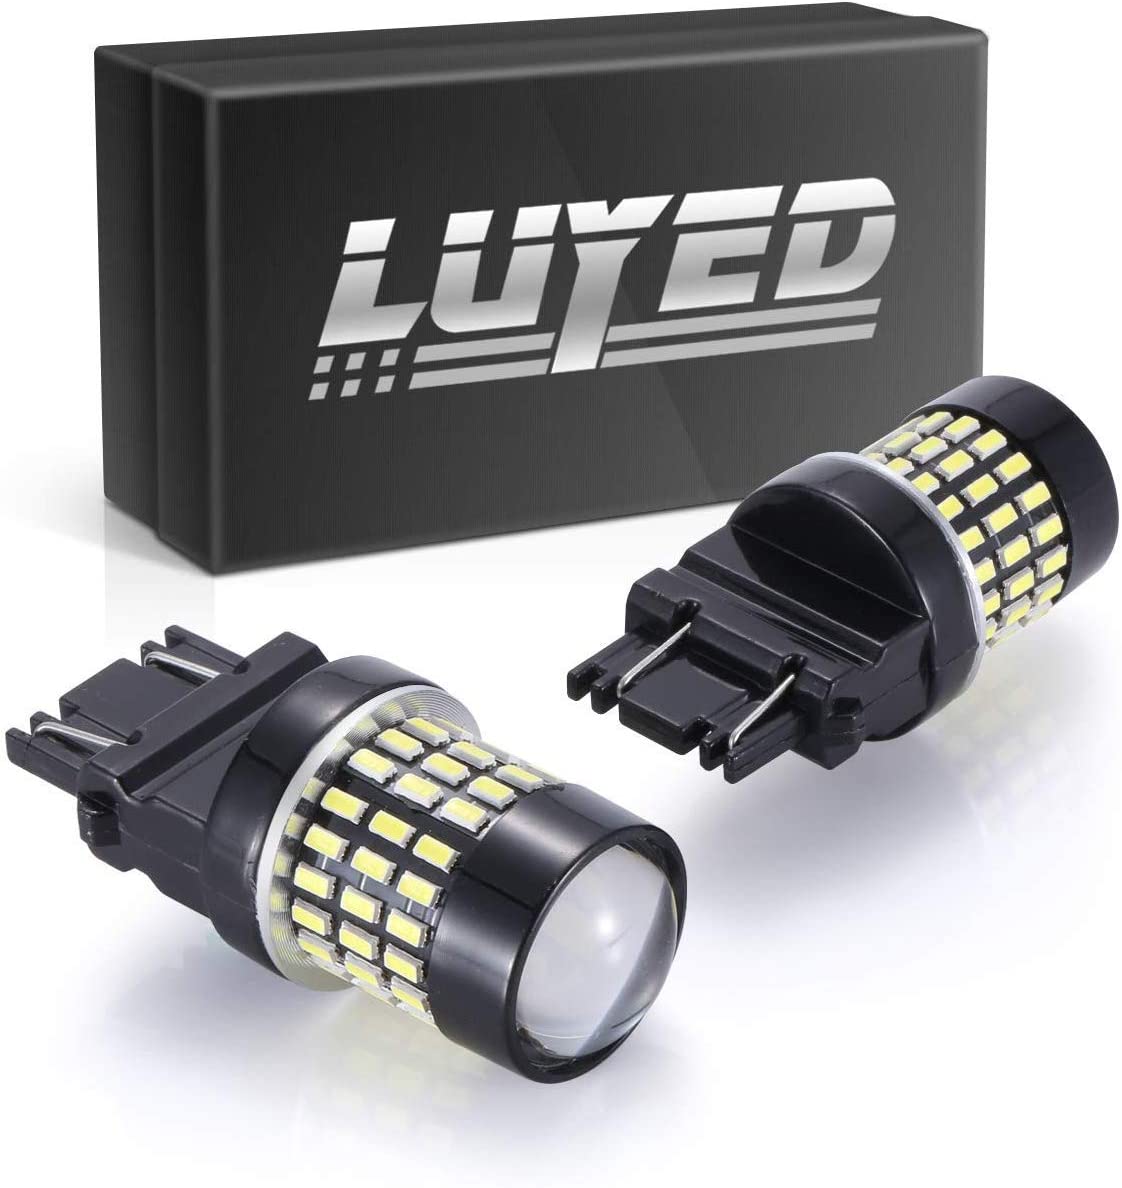 LUYED 2 x Super Bright 9-30v 1157 2057 2357 7528 BAY15D LED Bulbs Used For Turn Signal Lights,Tail Lights,Xenon White 